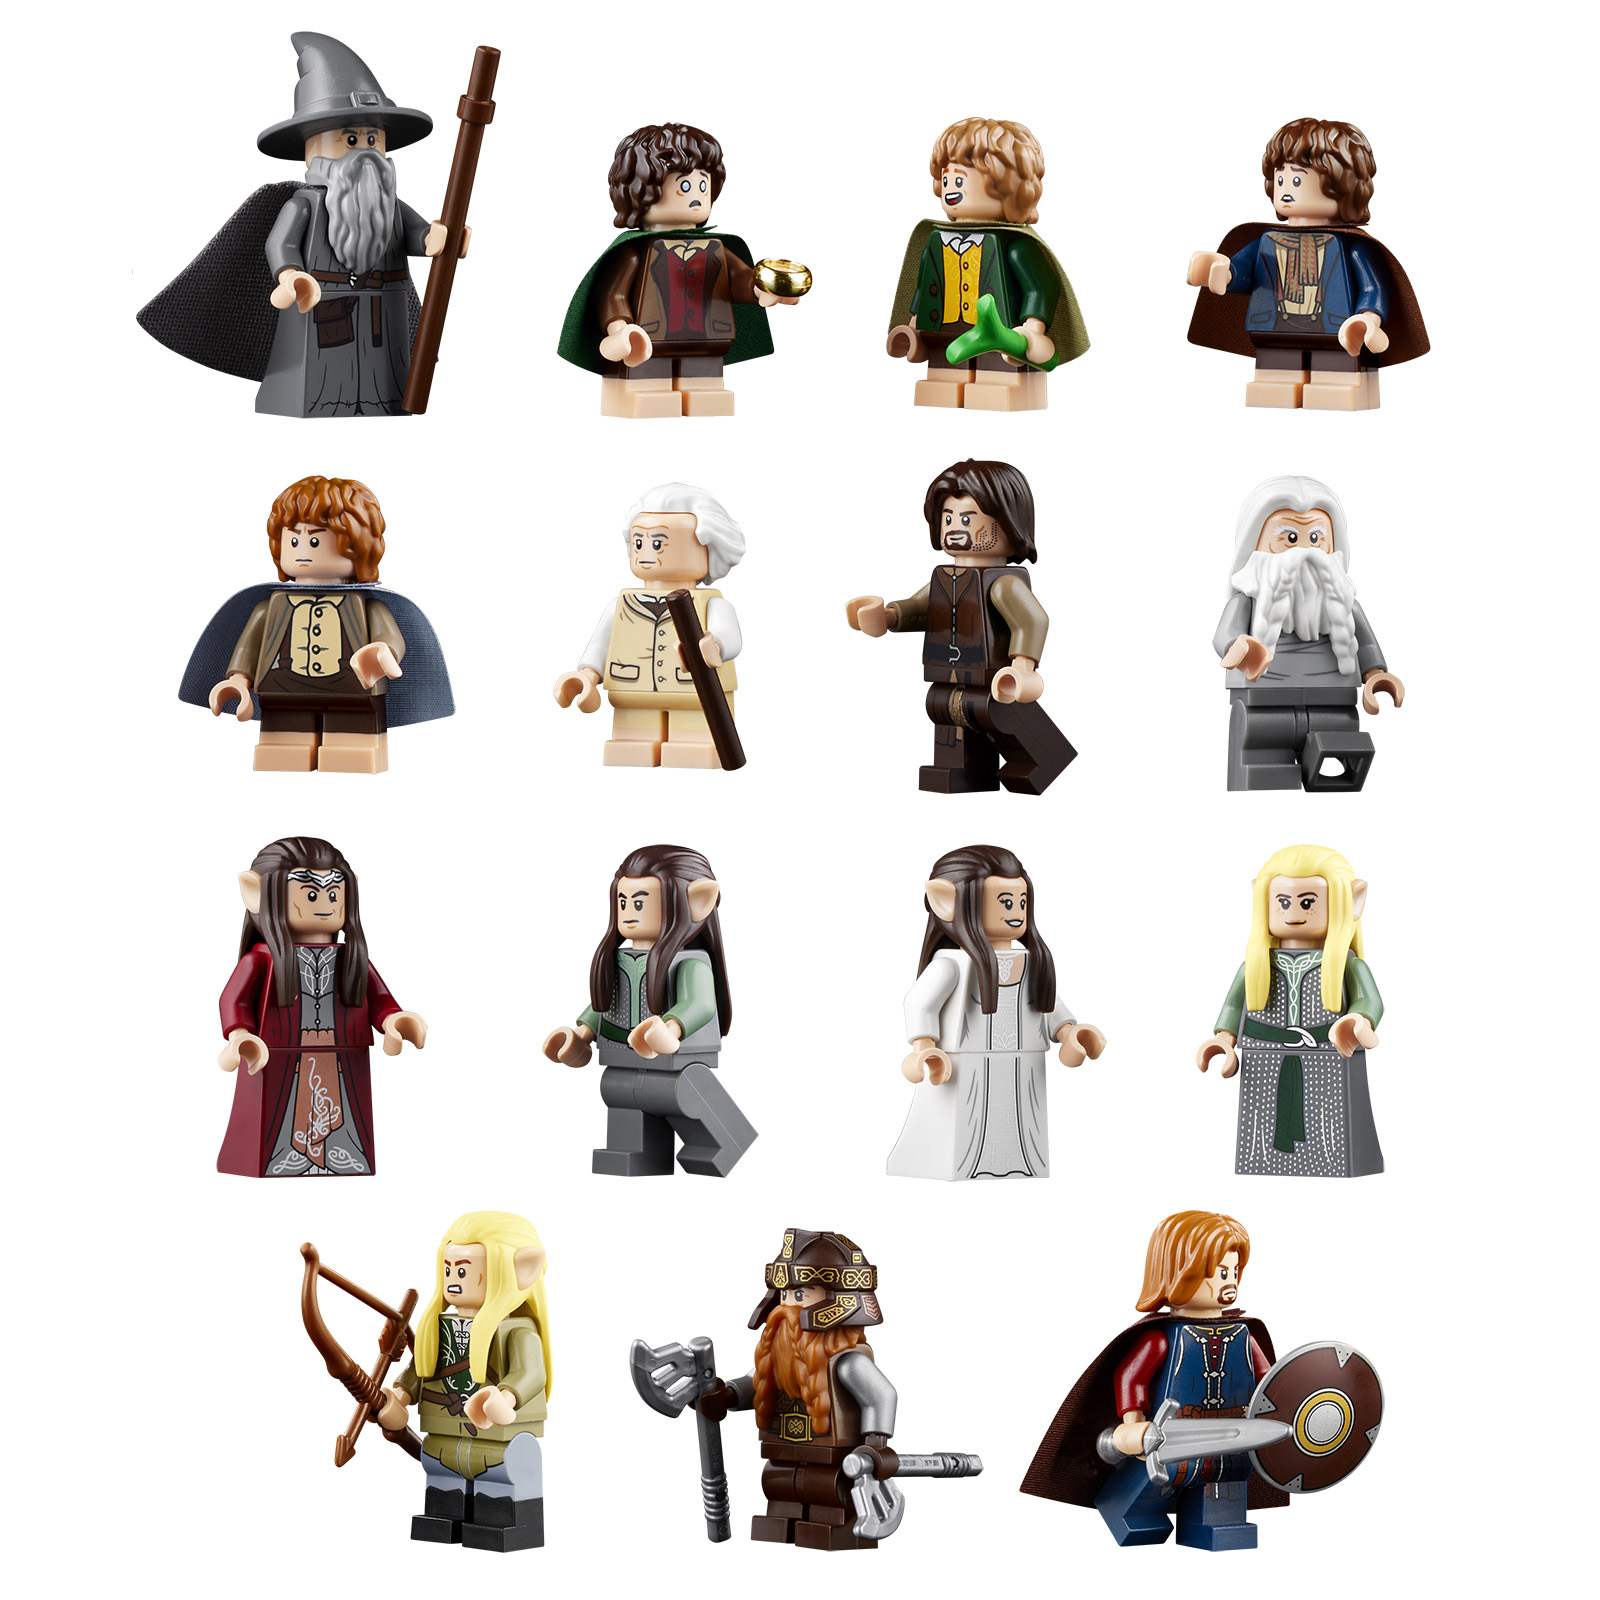 [LEGO] THE LORD OF THE RING / THE HOBBIT seigneur anneaux - Page 7 Lego-icons-10316-lord-rings-rivendell-minifigures